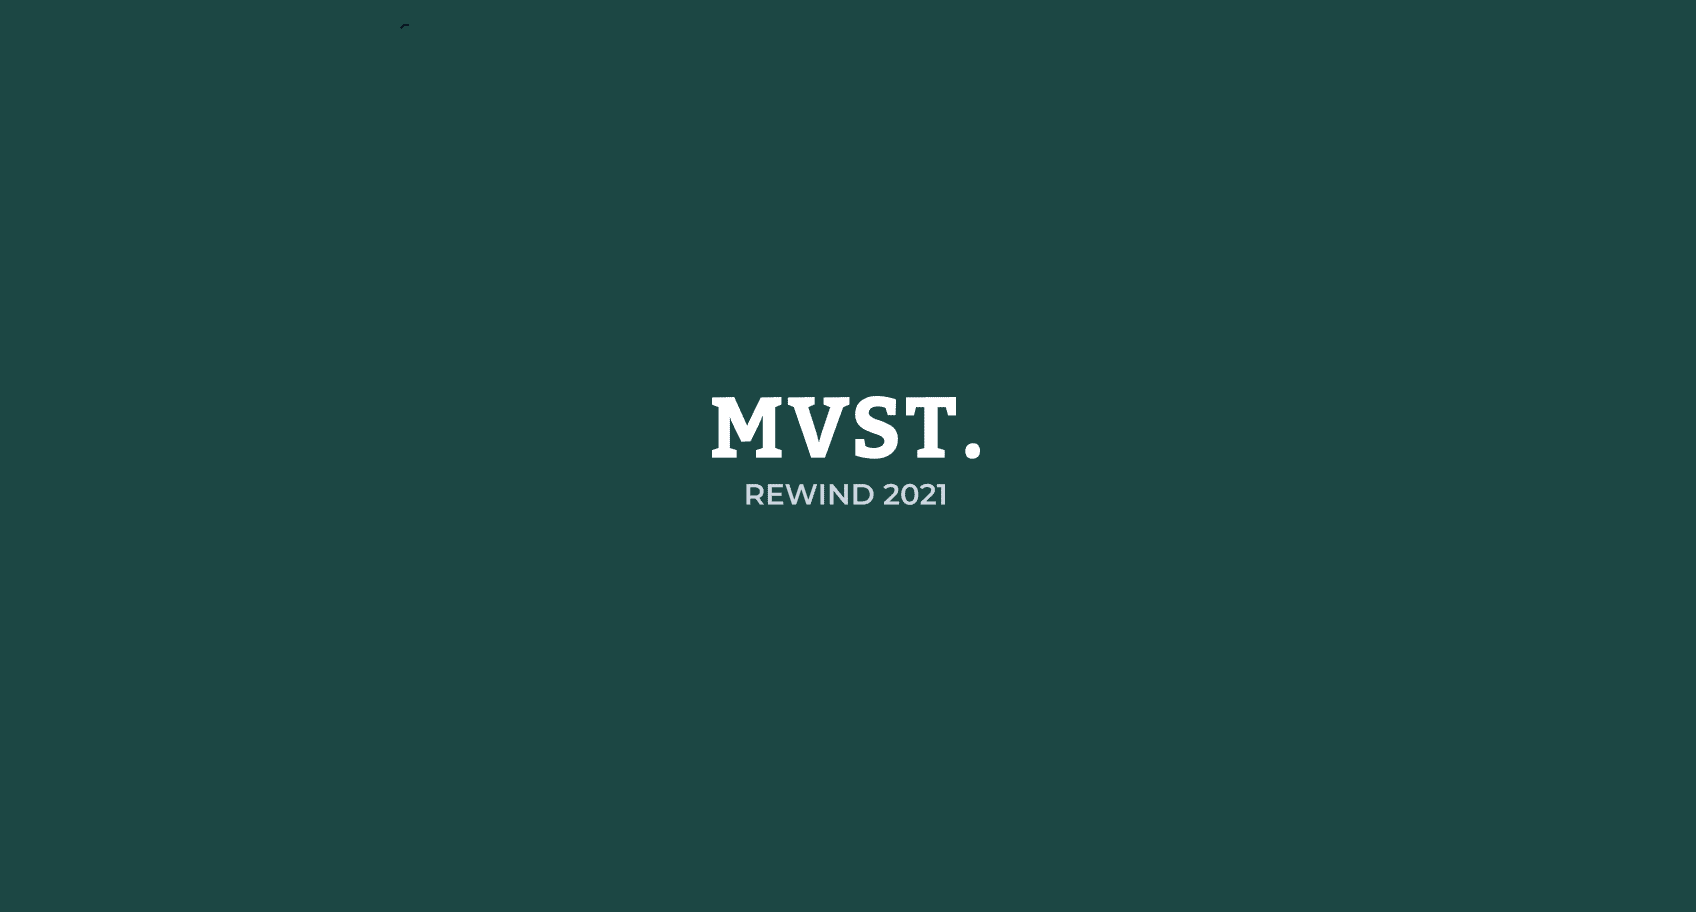 A review on 2021 at MVST